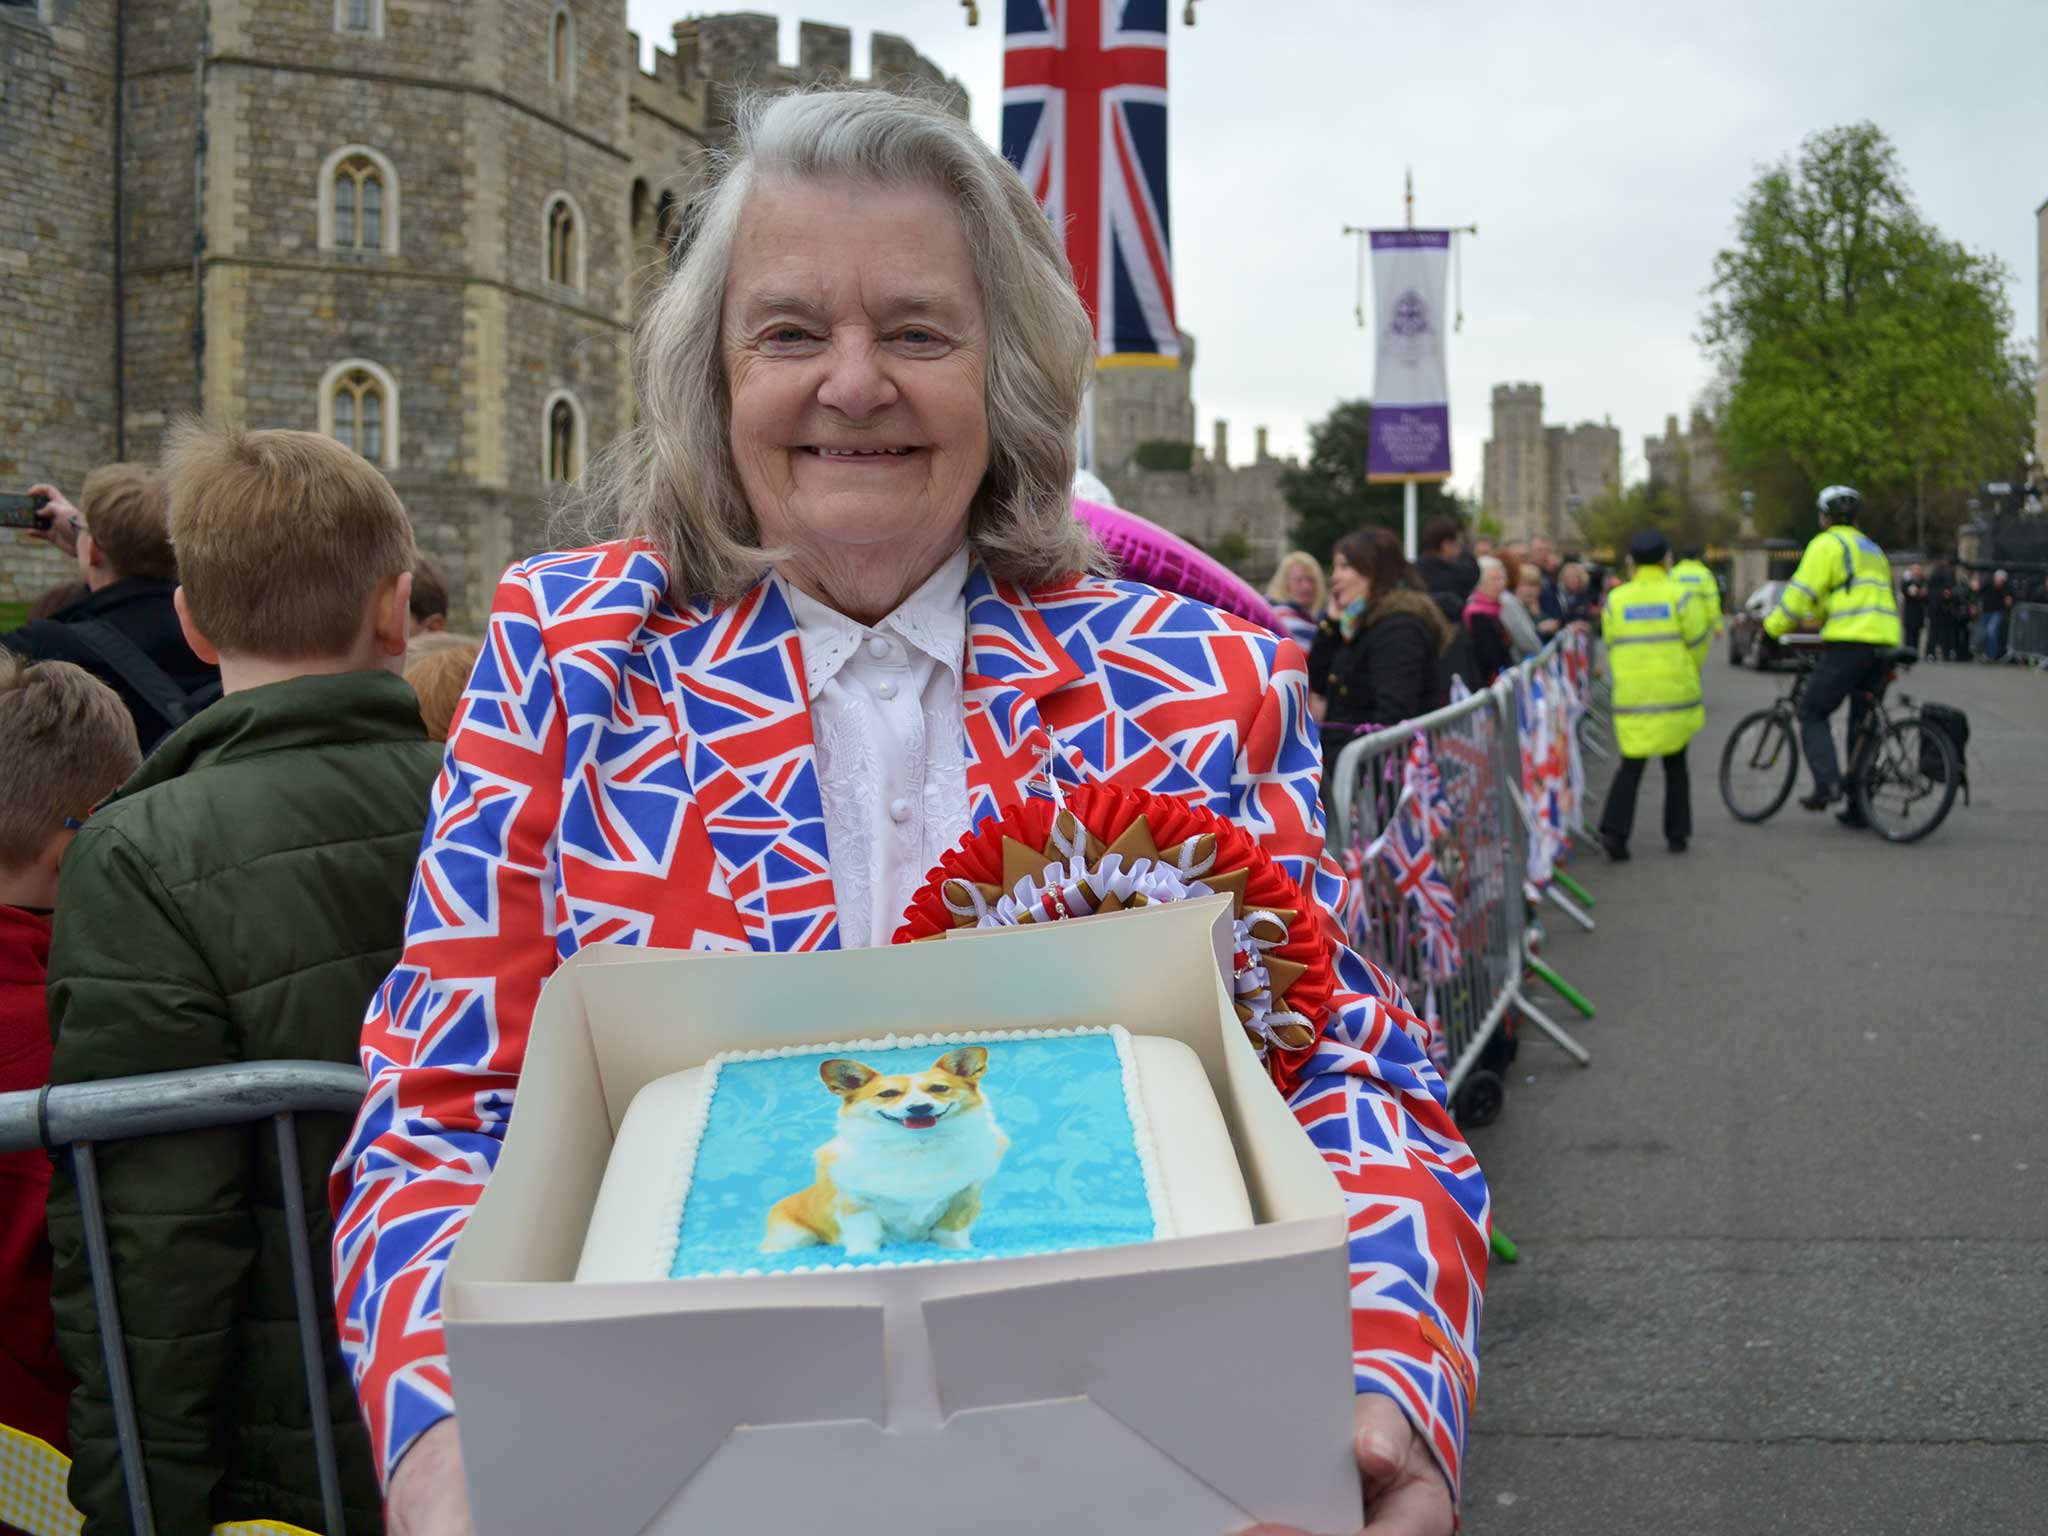 Margaret Tyler, who gave the Queen a birthday cake with a corgi on it